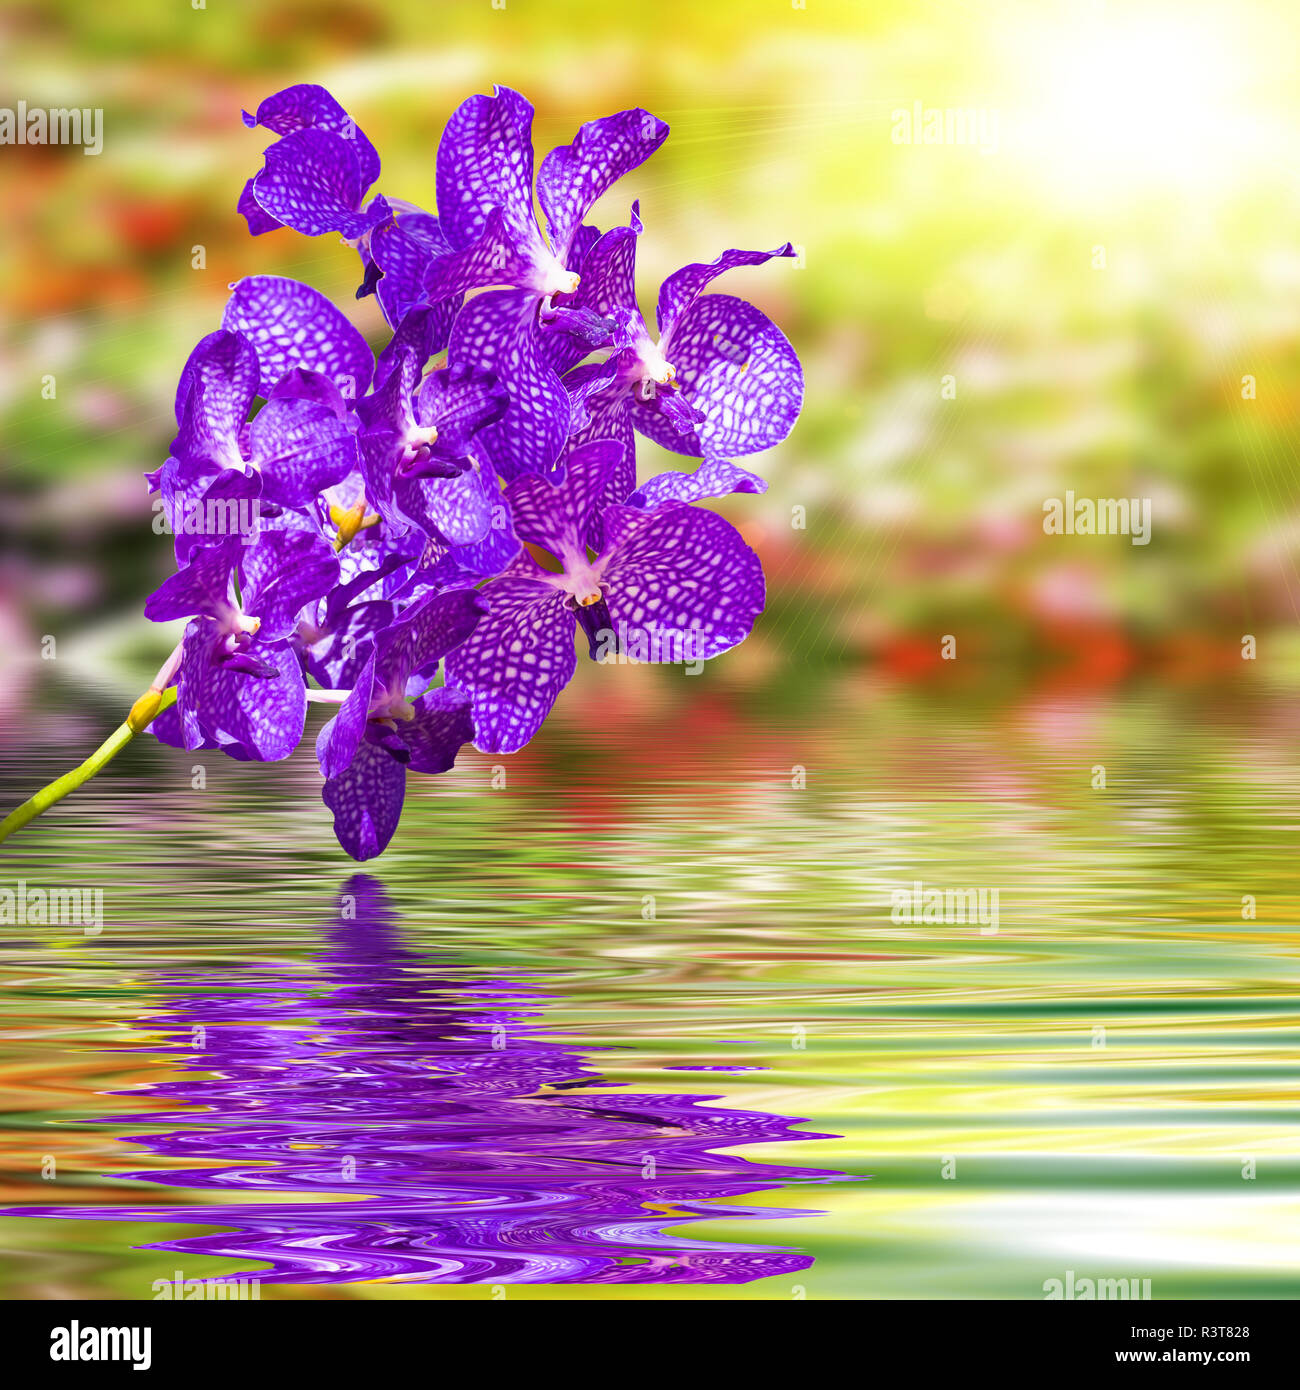 Violet orchid flower on ripple water with colorful blur nature background Stock Photo